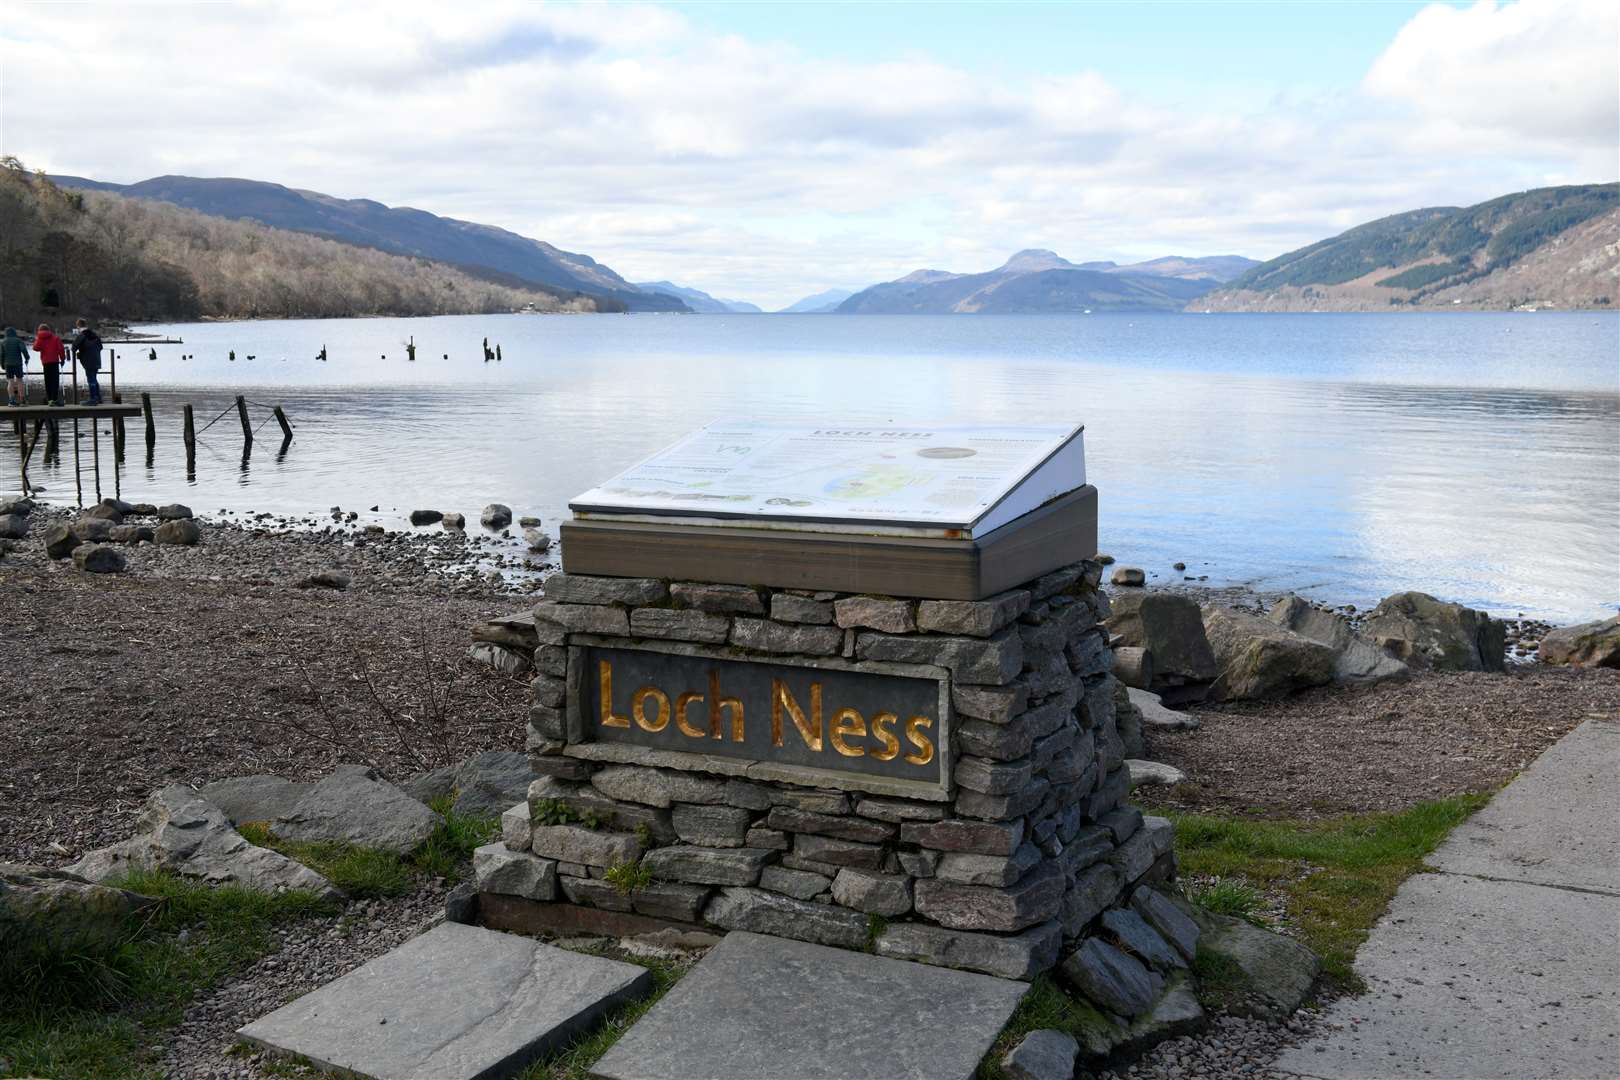 A new mysterious appearance in the waters of Loch Ness was reported. Picture: James Mackenzie.